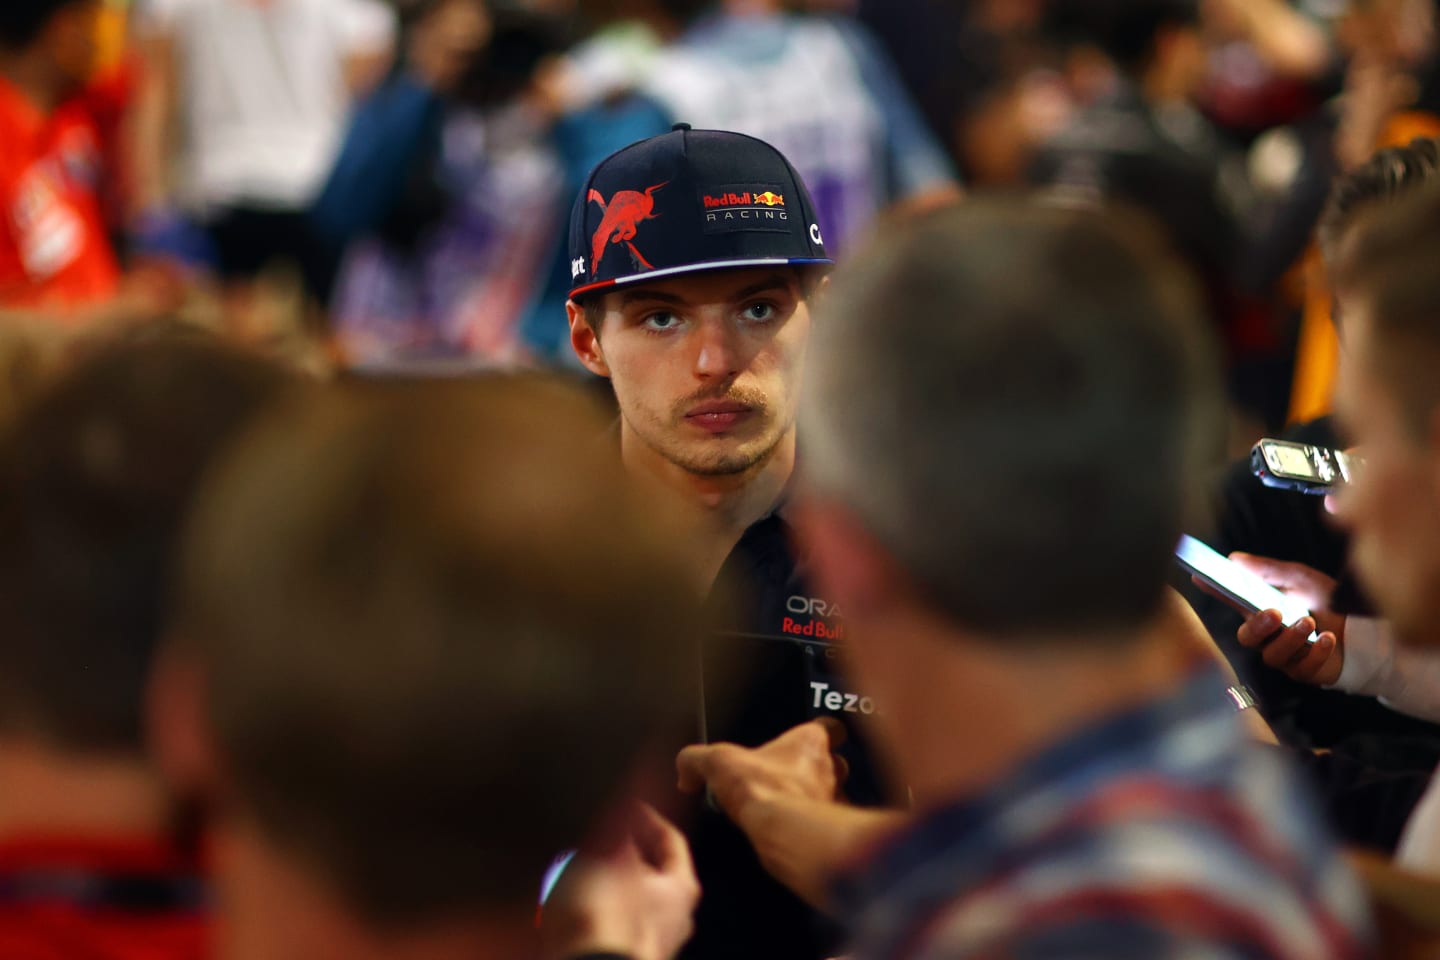 BAHRAIN, BAHRAIN - MARCH 20: Max Verstappen of the Netherlands and Oracle Red Bull Racing talks to the media in the Paddock after the F1 Grand Prix of Bahrain at Bahrain International Circuit on March 20, 2022 in Bahrain, Bahrain. (Photo by Dan Istitene - Formula 1/Formula 1 via Getty Images)